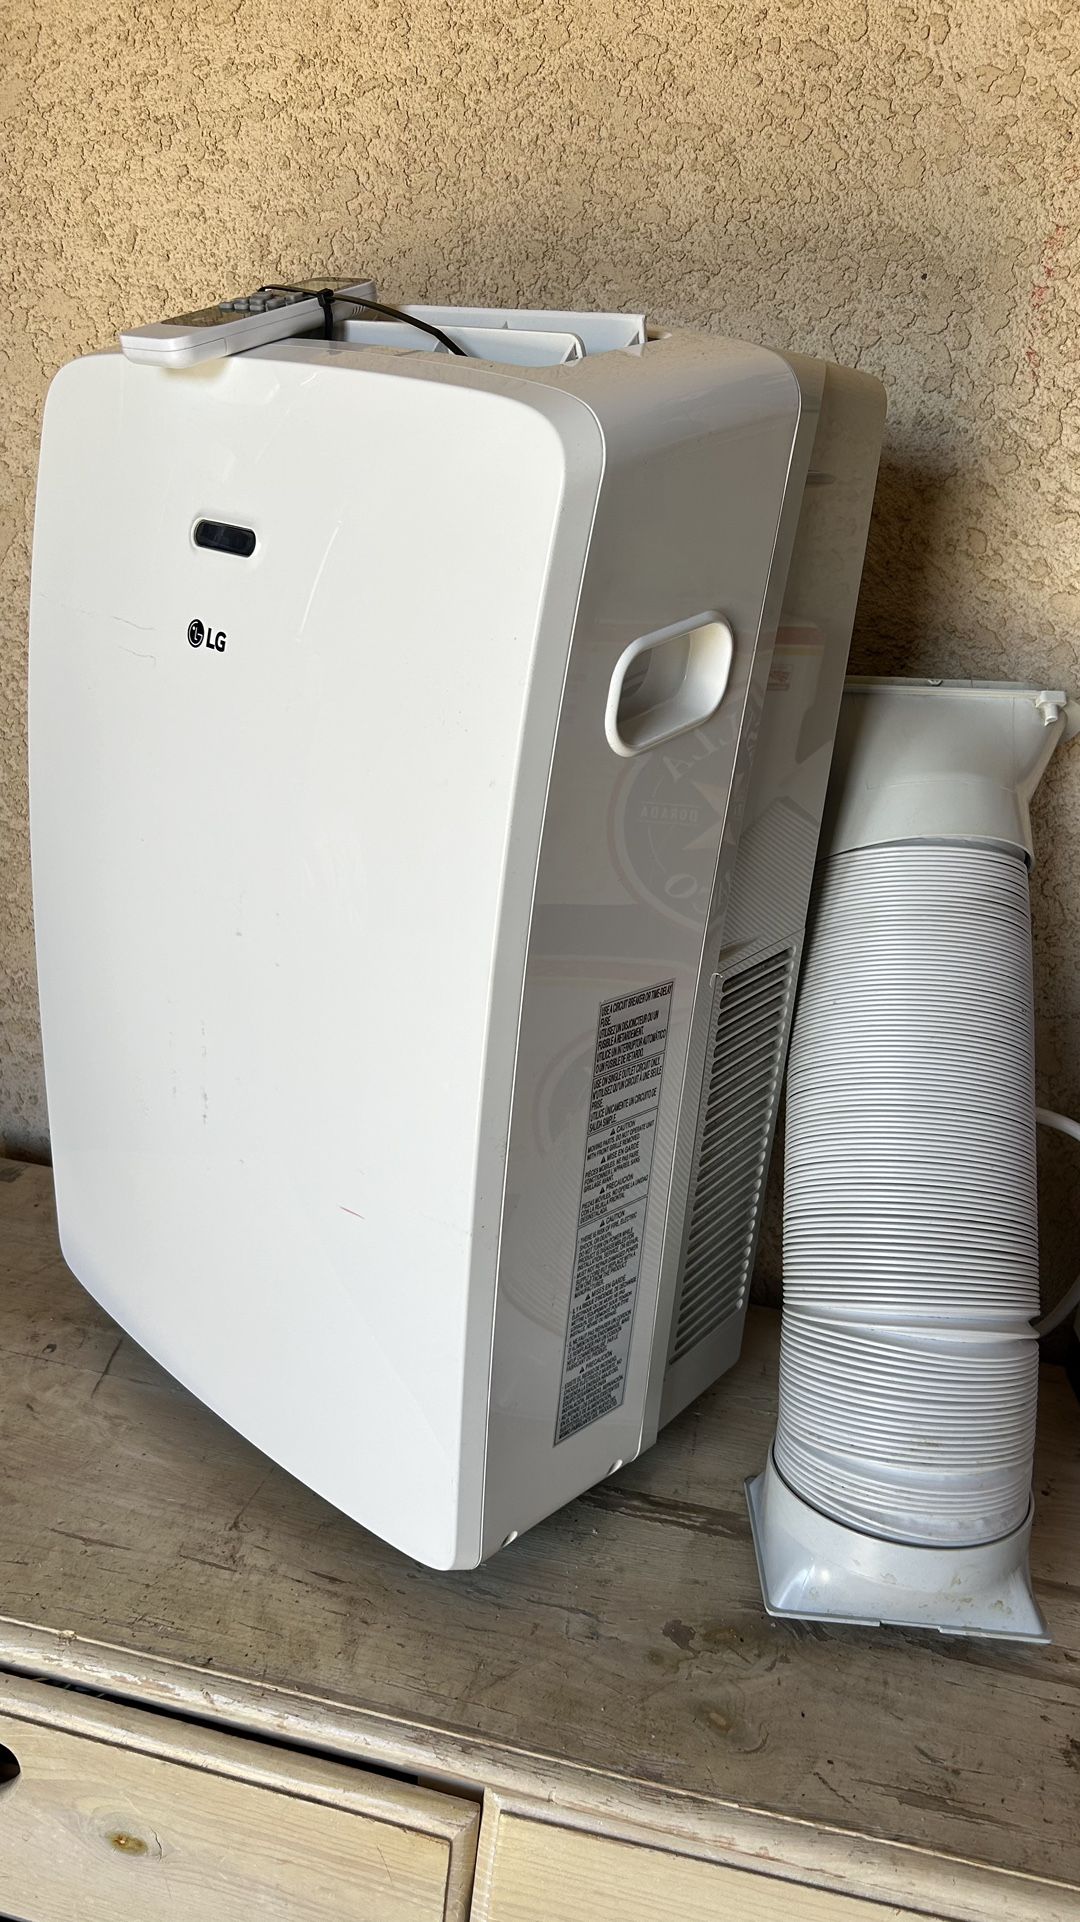 LG 10.200 Btu Air Conditioner Like New Comes With Remote Control And Attachments